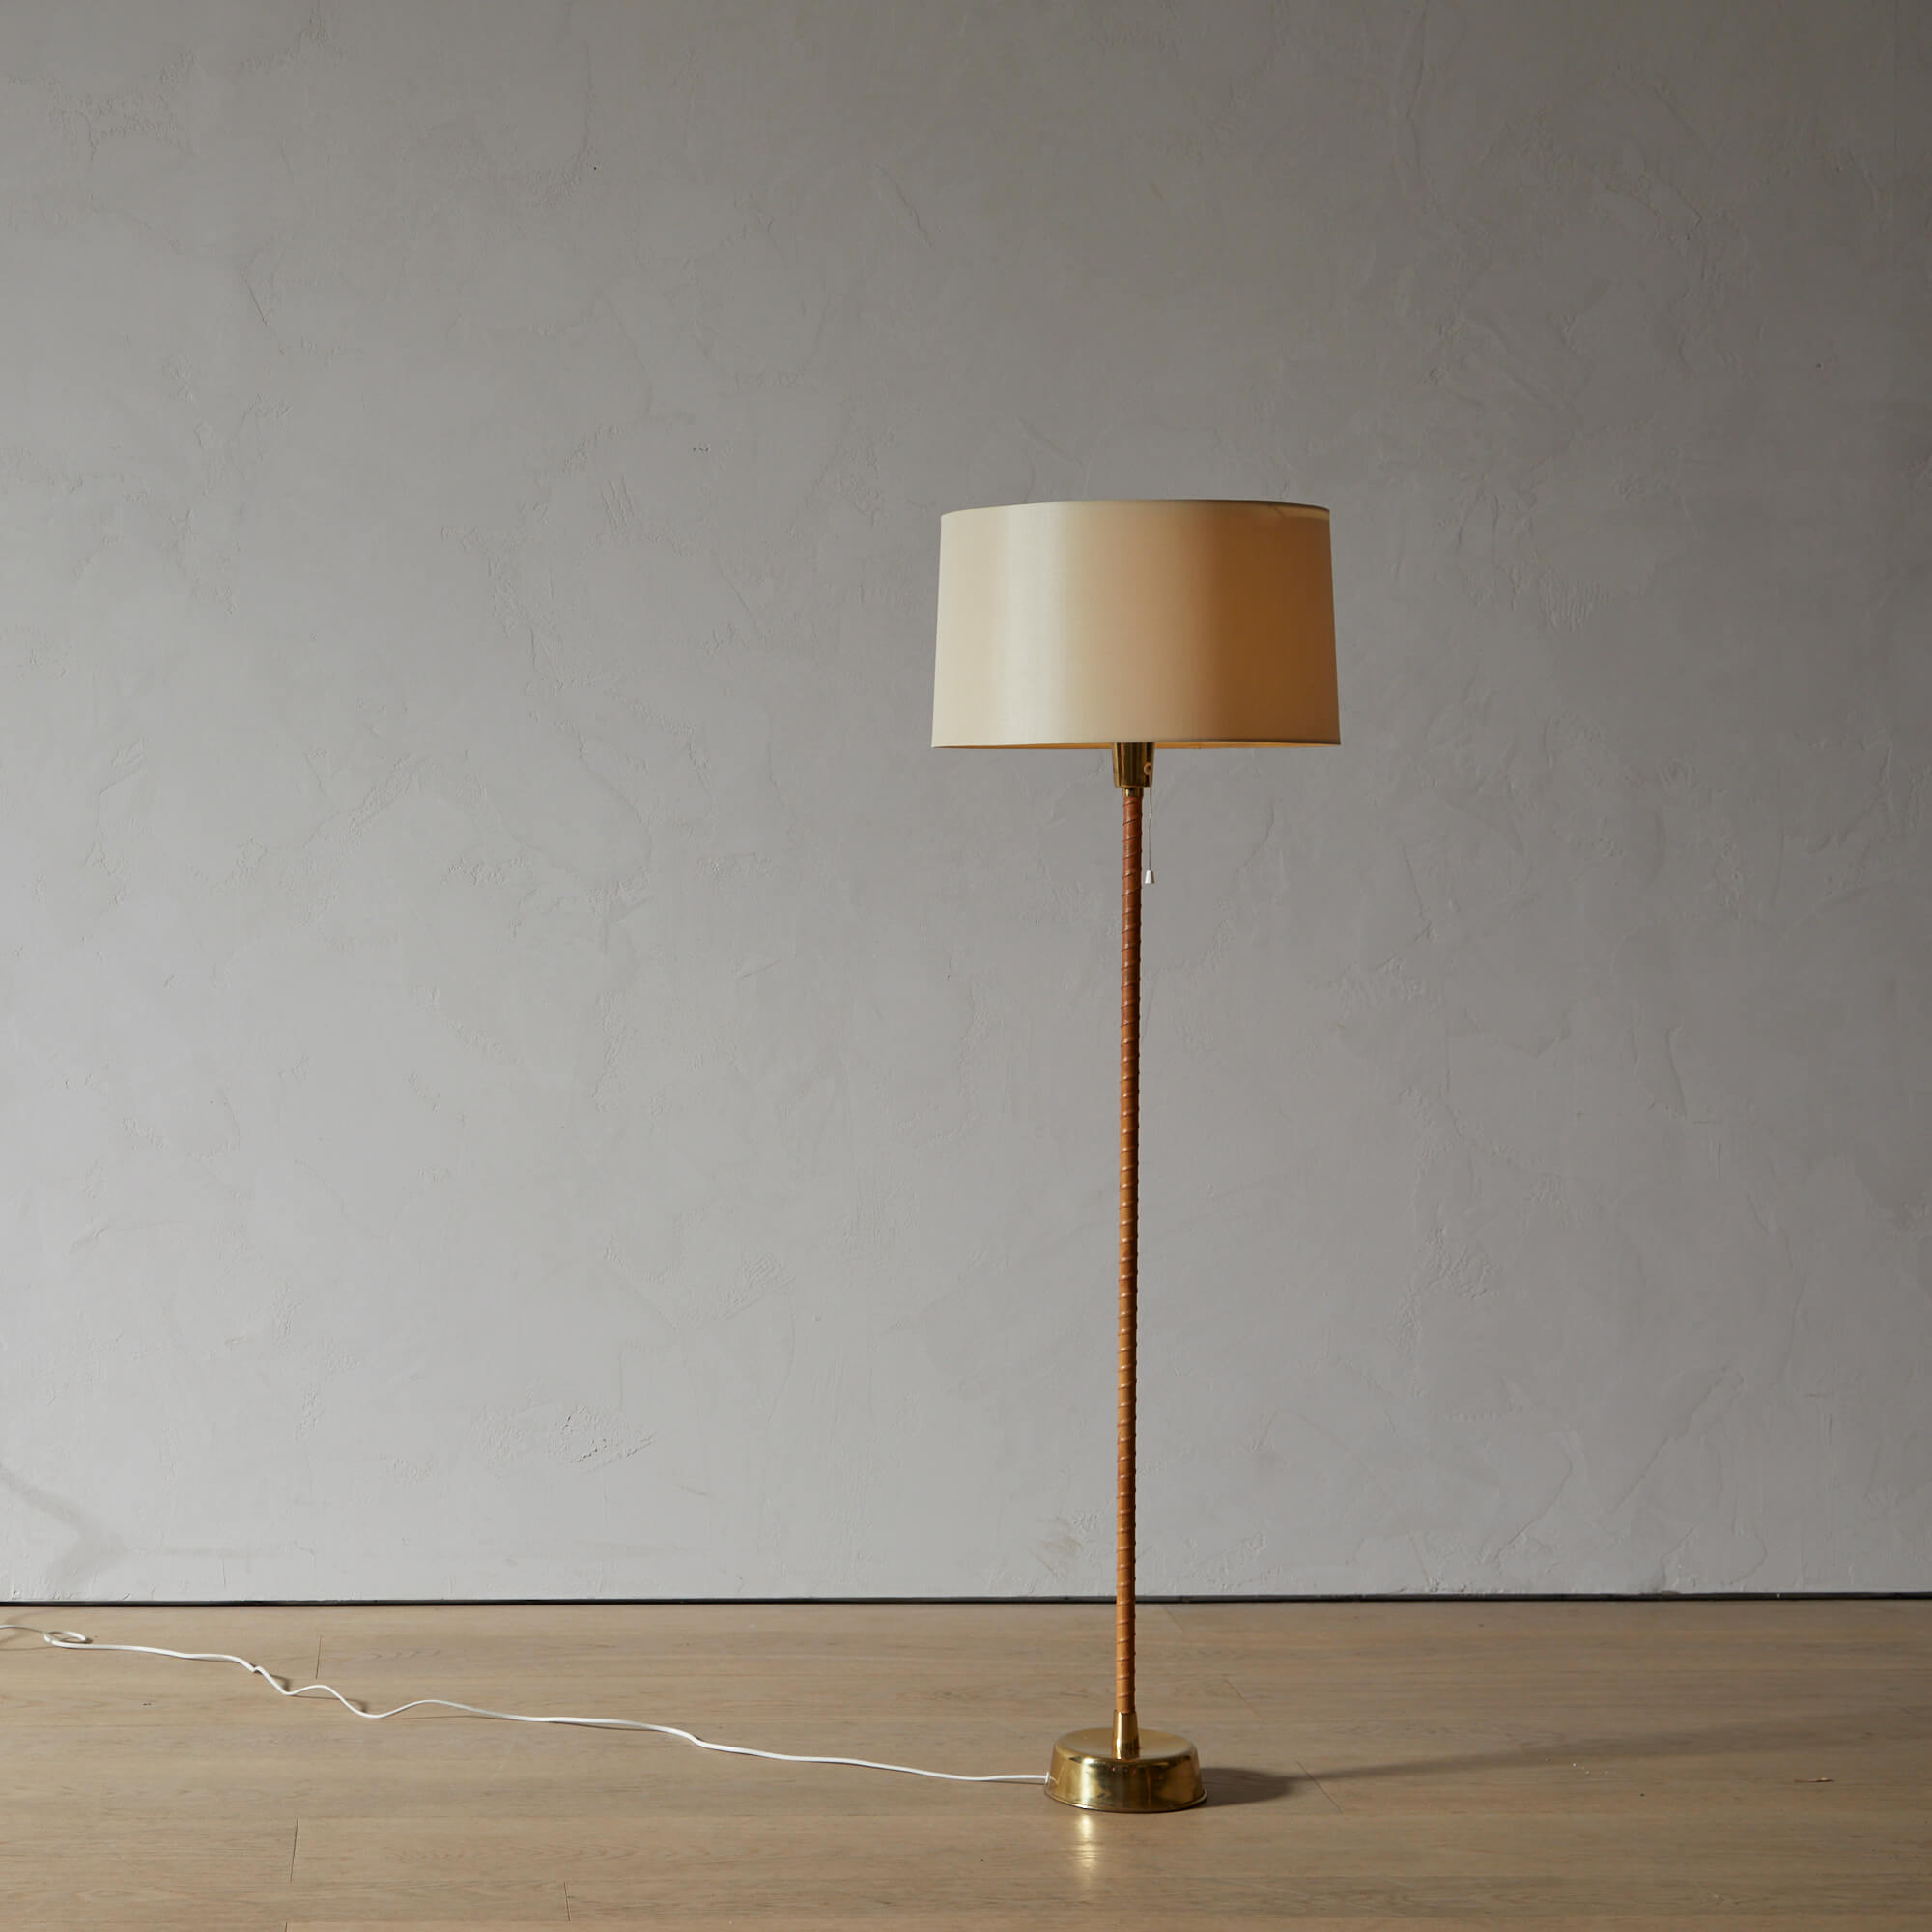 Leather-wrapped Floor Lamp by Lisa Johansson-Pape